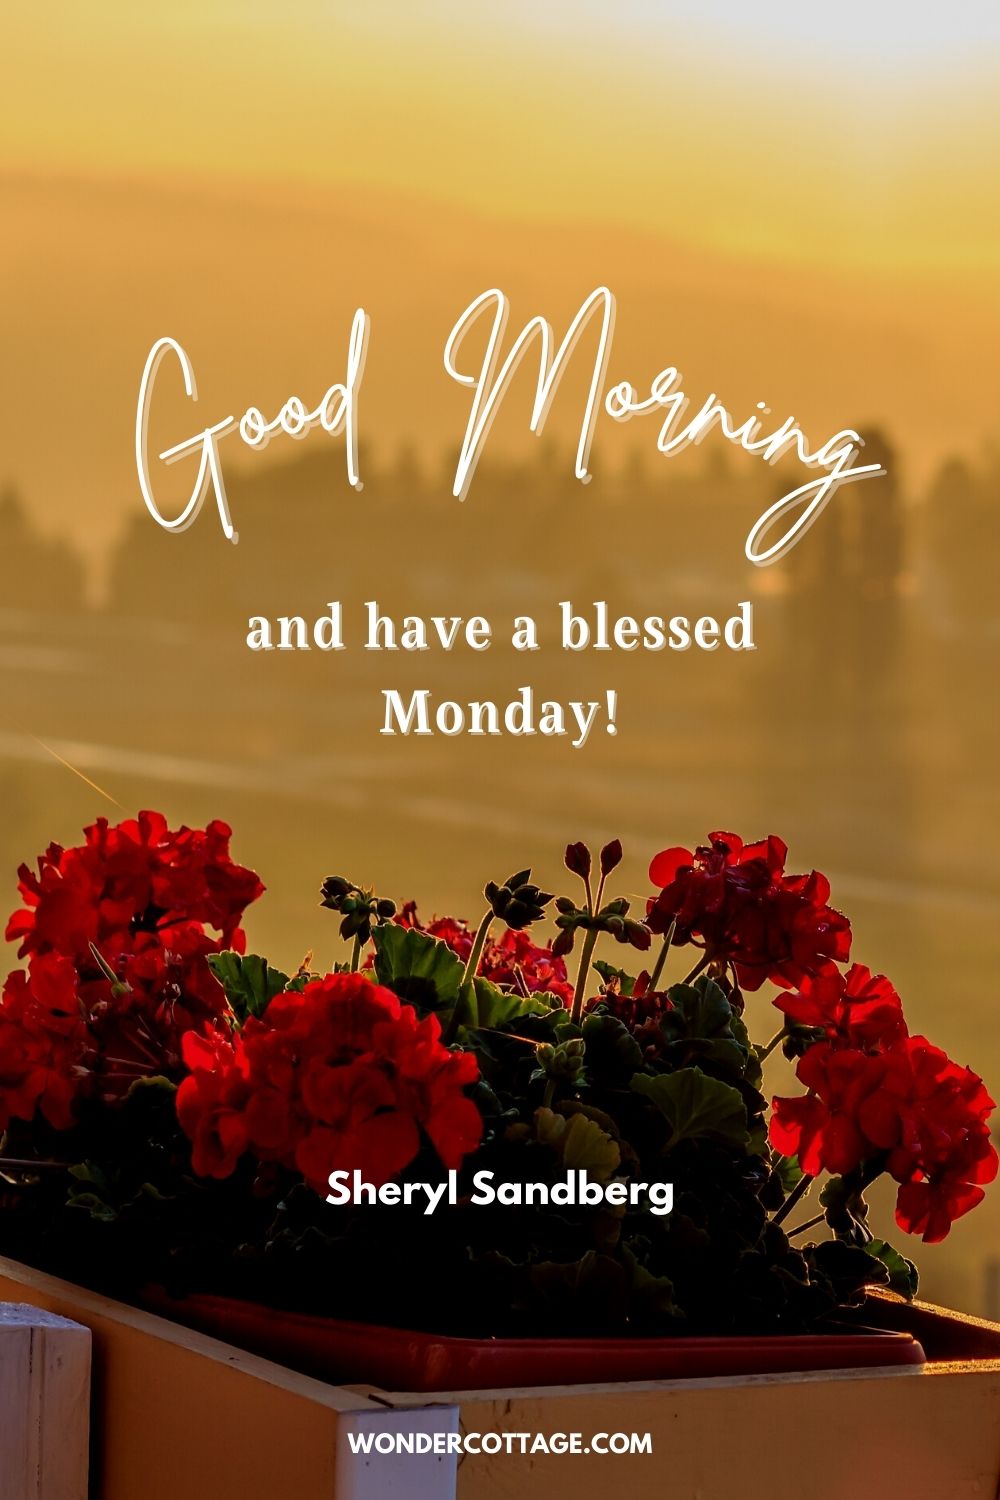 Good morning and have a blessed Monday!